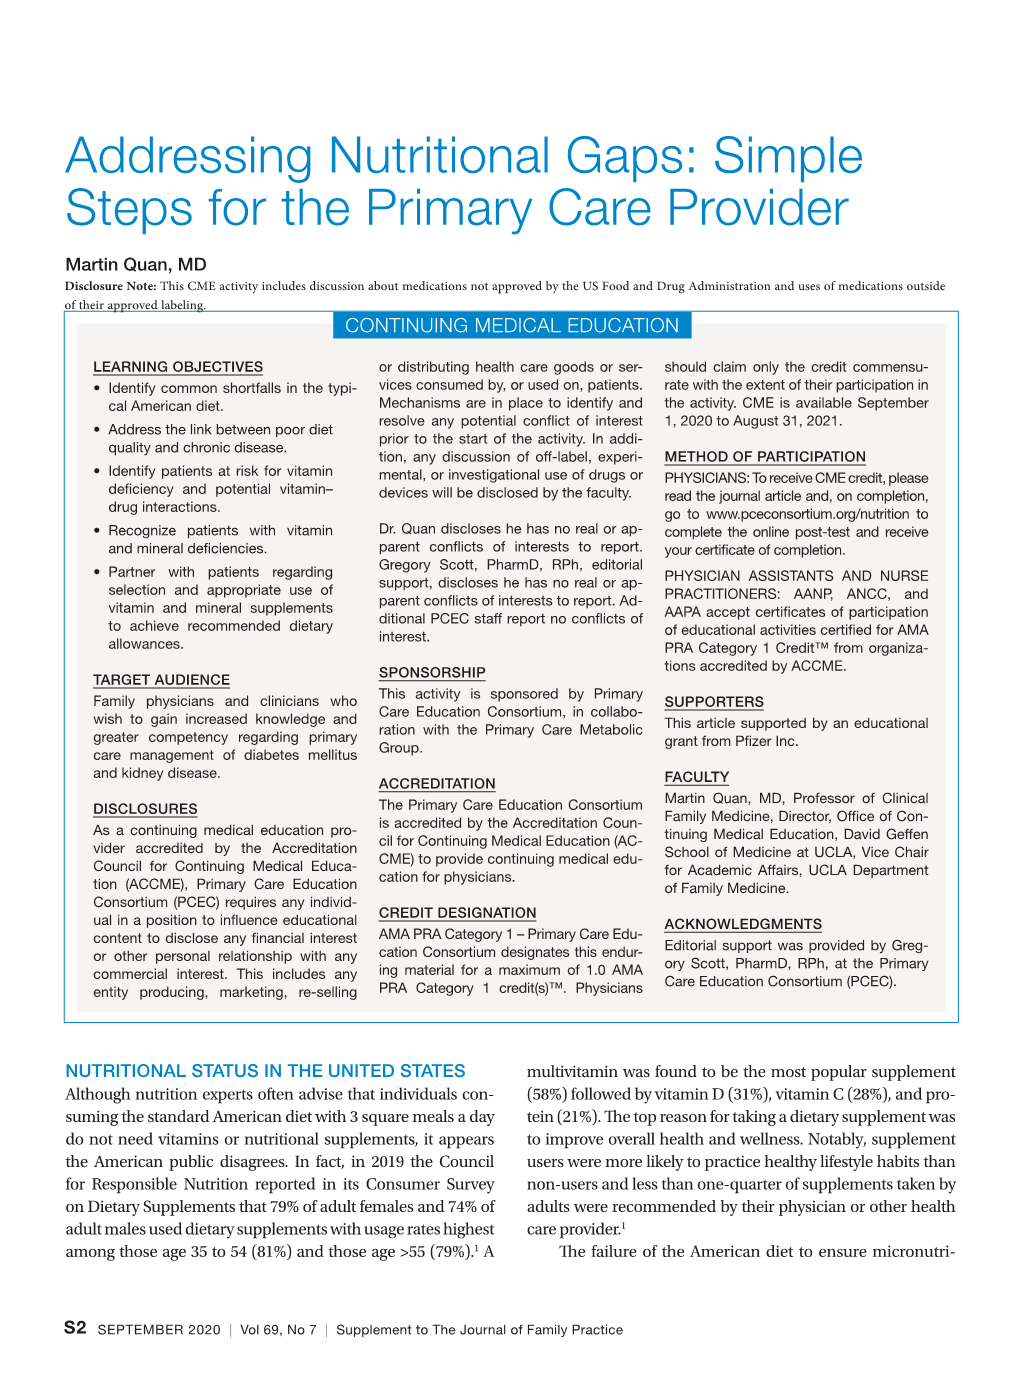 Addressing Nutritional Gaps: Simple Steps for the Primary Care Provider